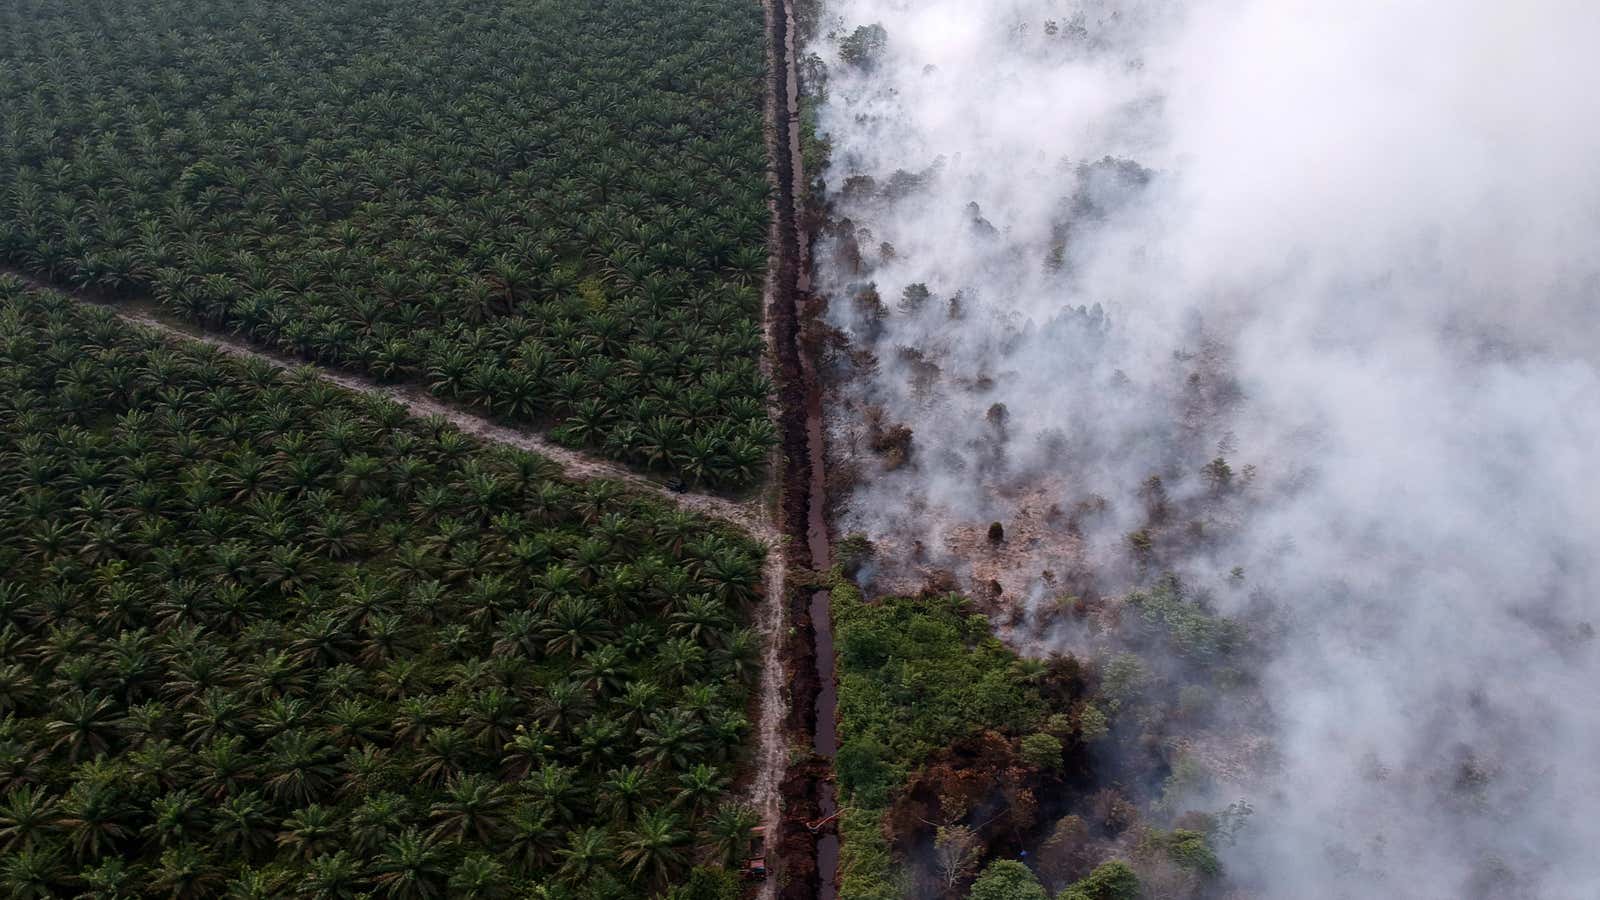 Palm oil producers light the forests on fire, to clear land for plantations. The fires burn out of control.